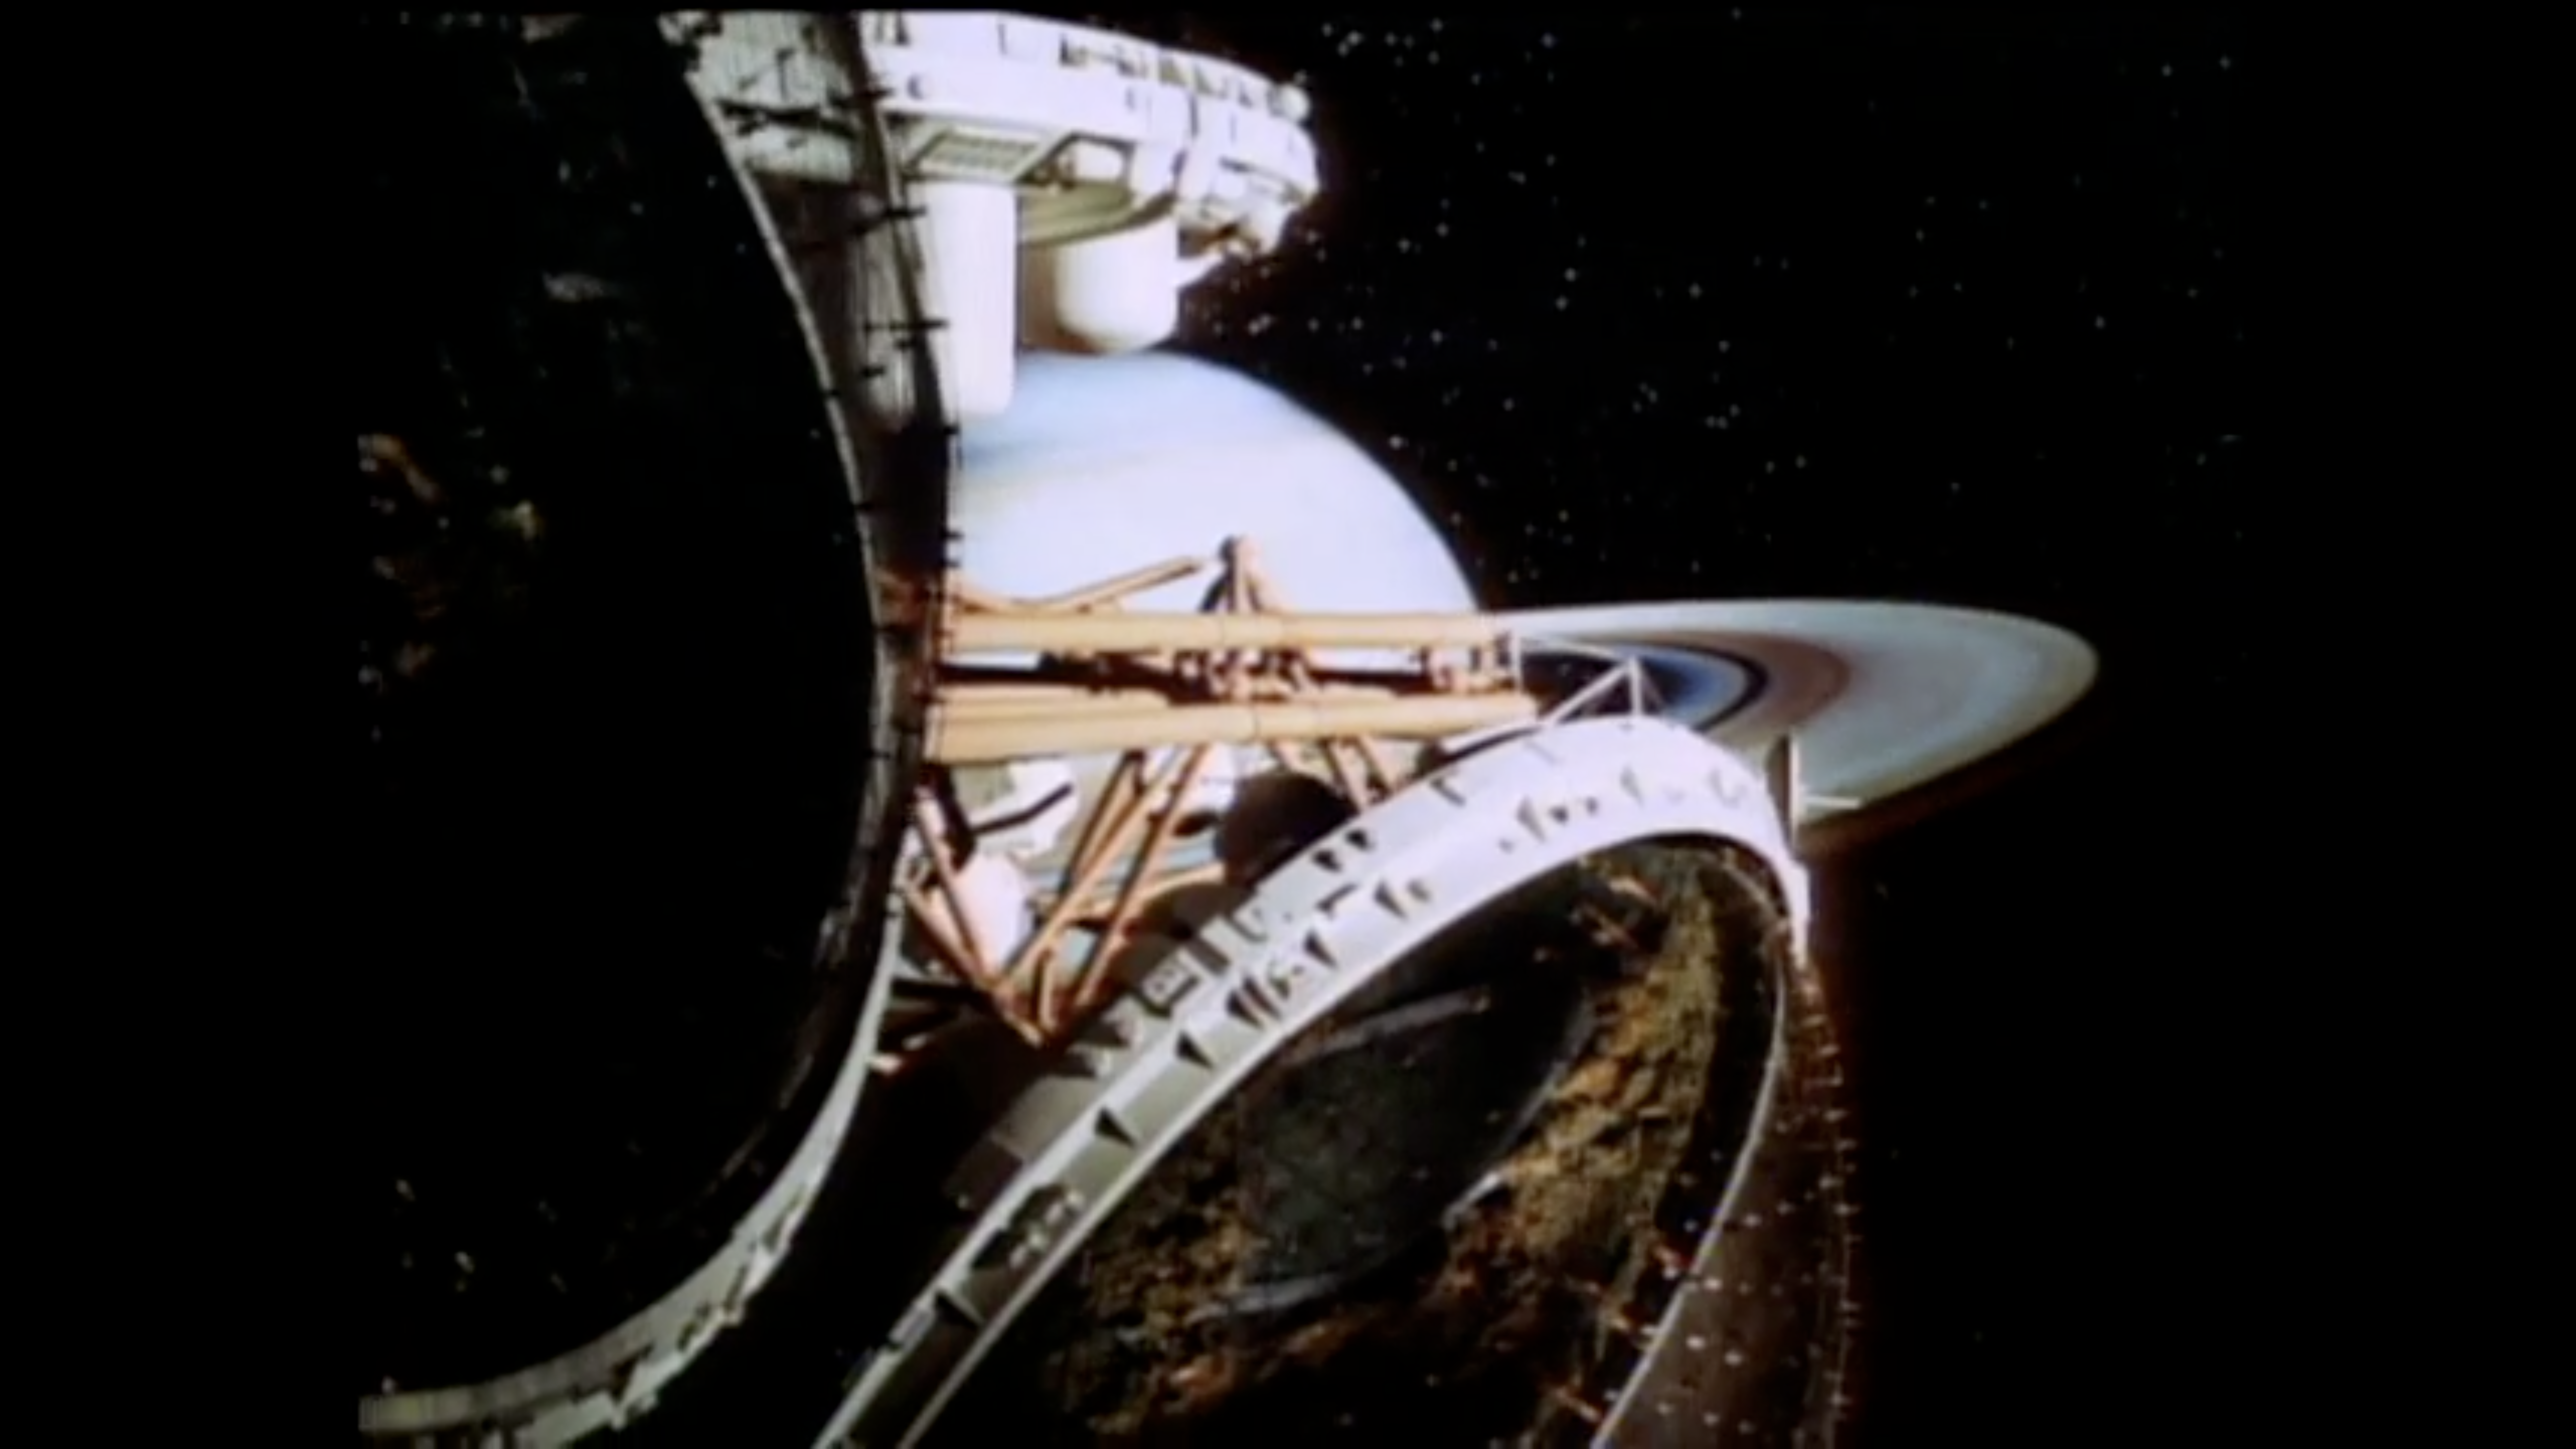 A screenshot of a video of a multi-domed space structure floating in front of a planet.